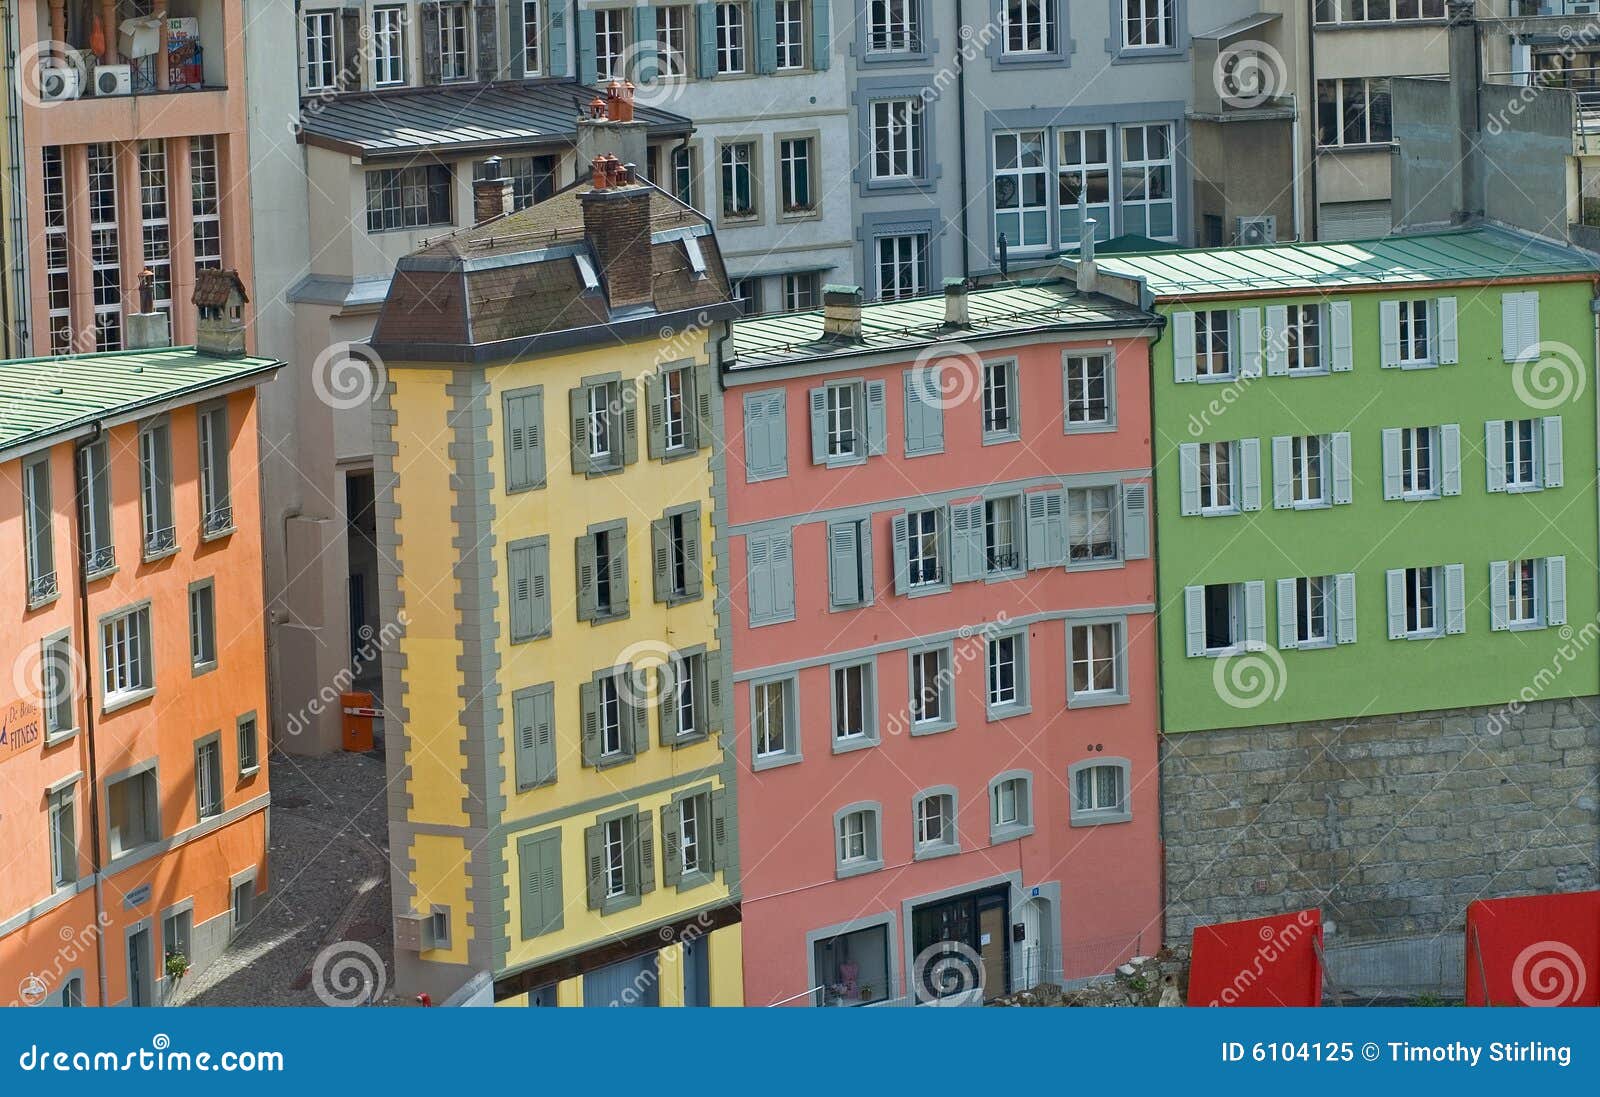 brightly colored street buildings